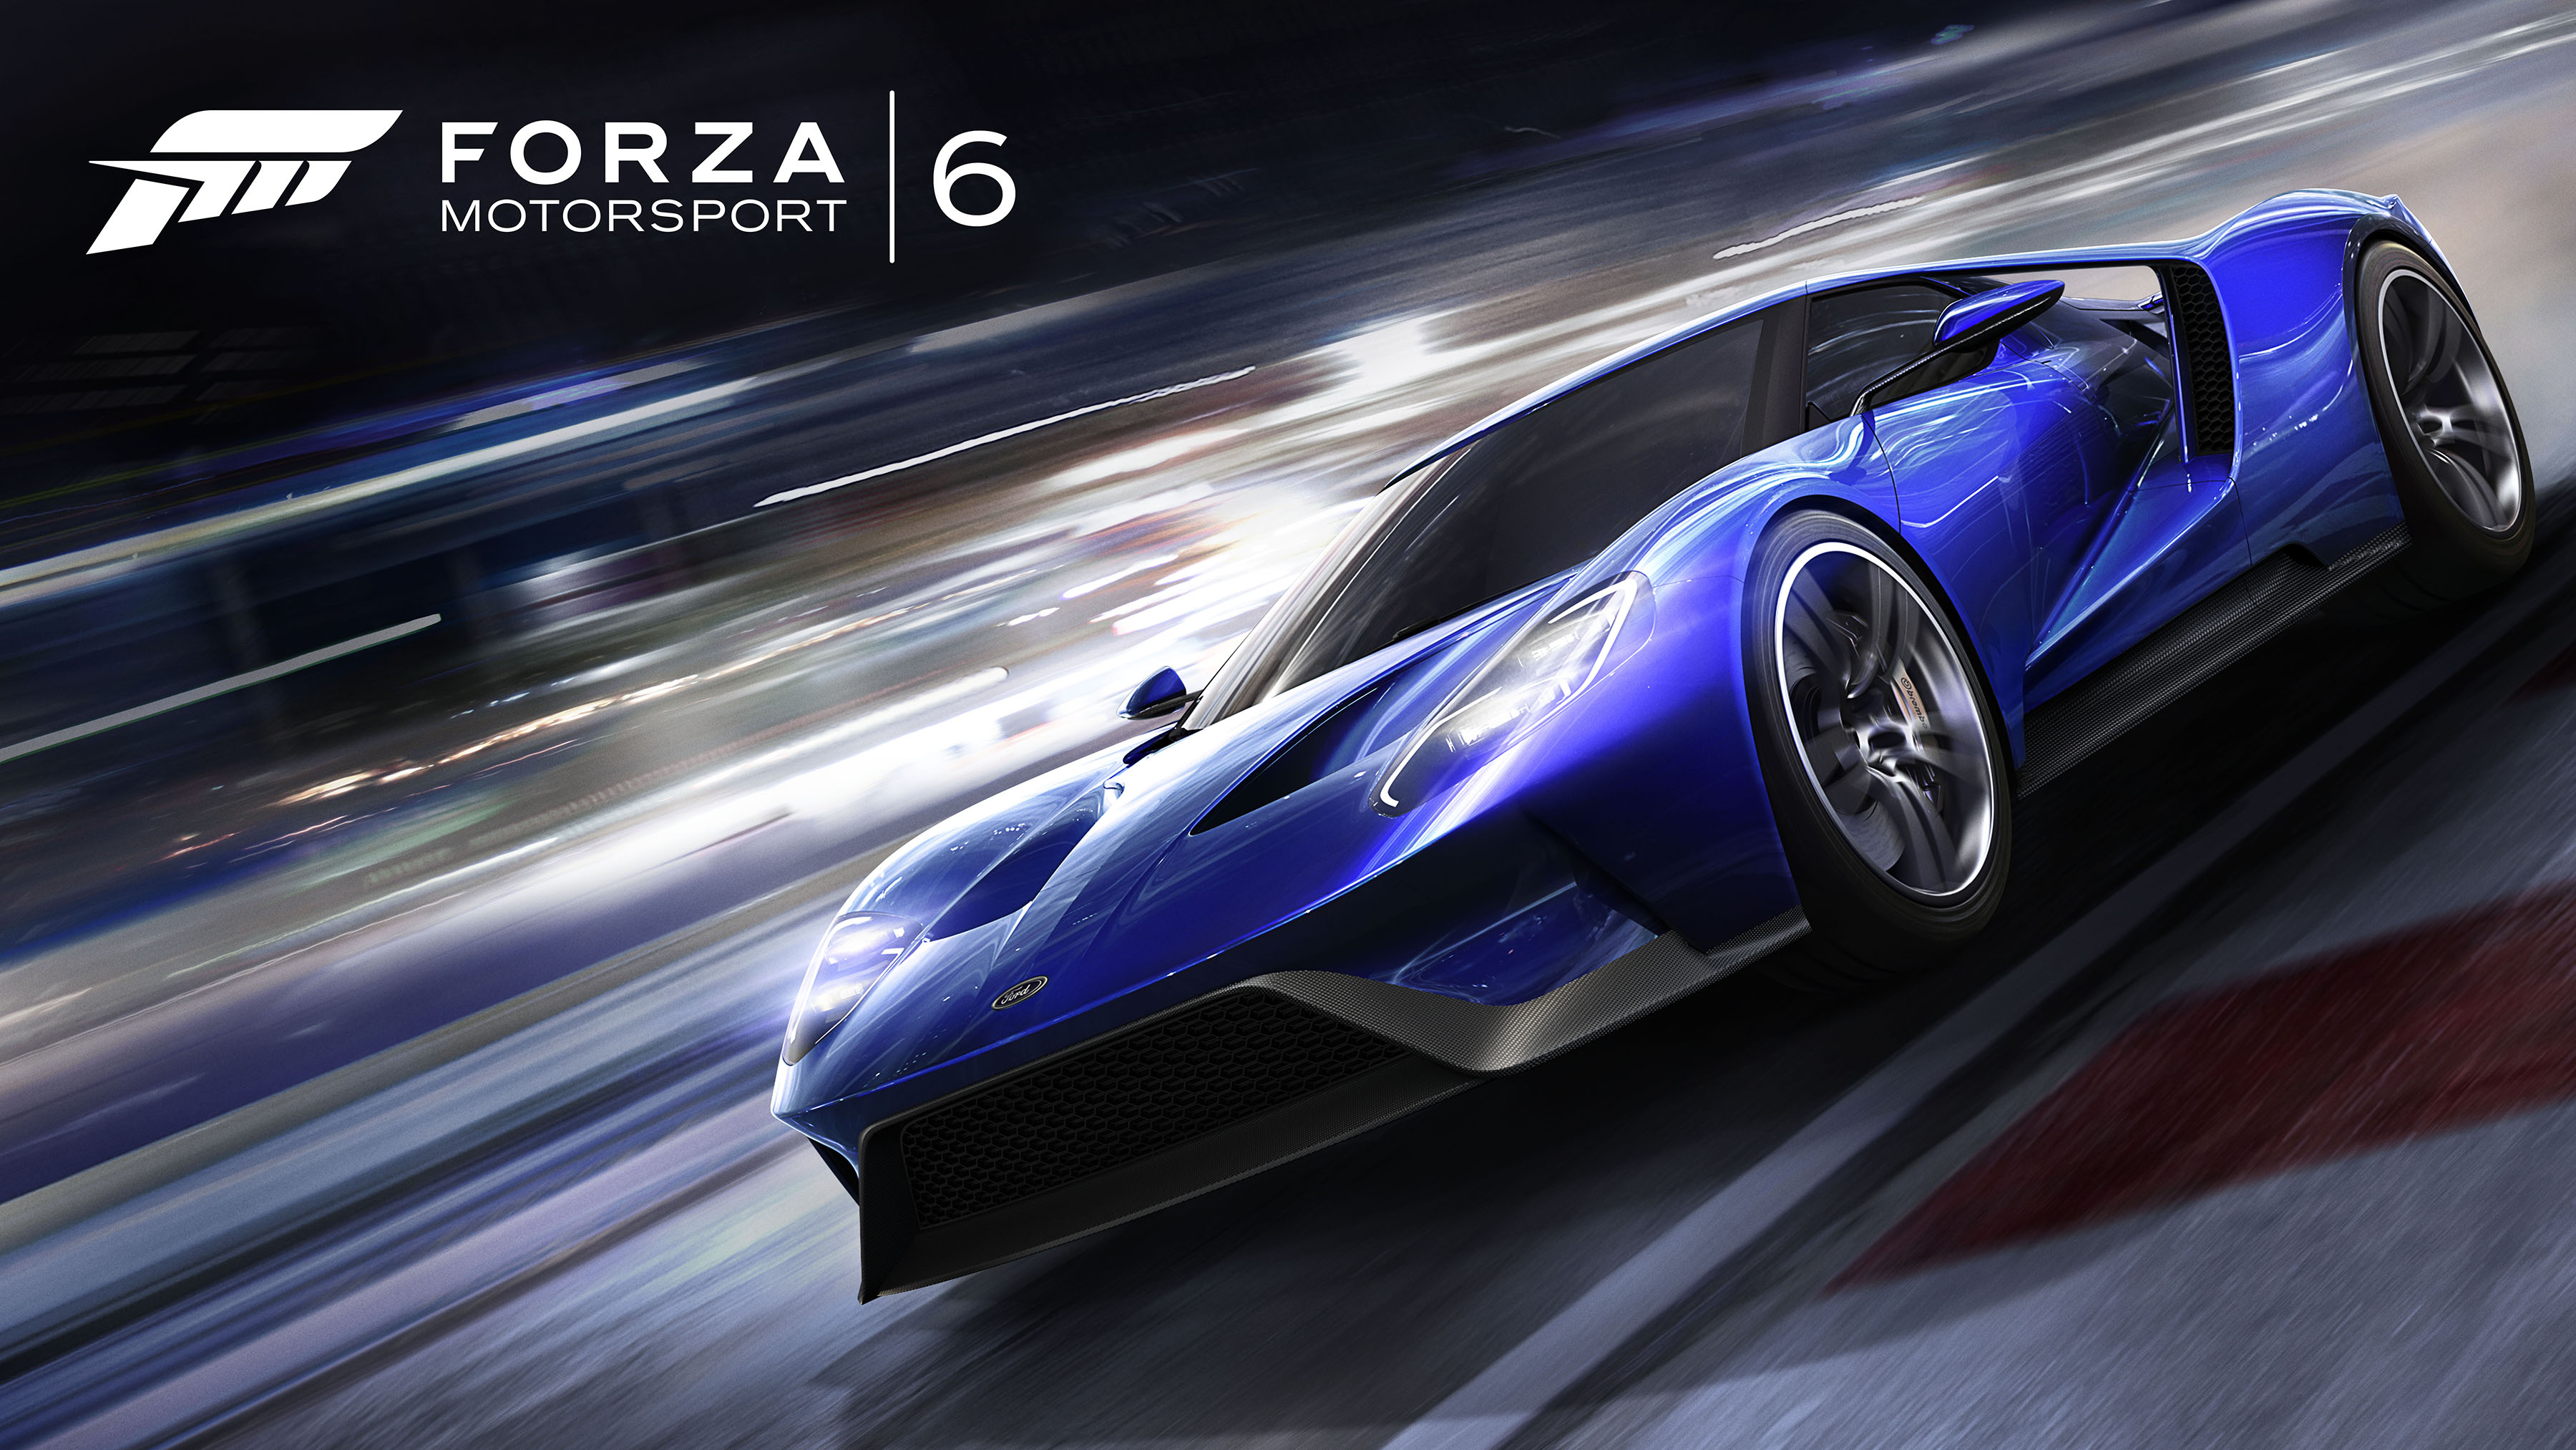 Forza Motorsport 6 Game Review - By Kevin Crandall